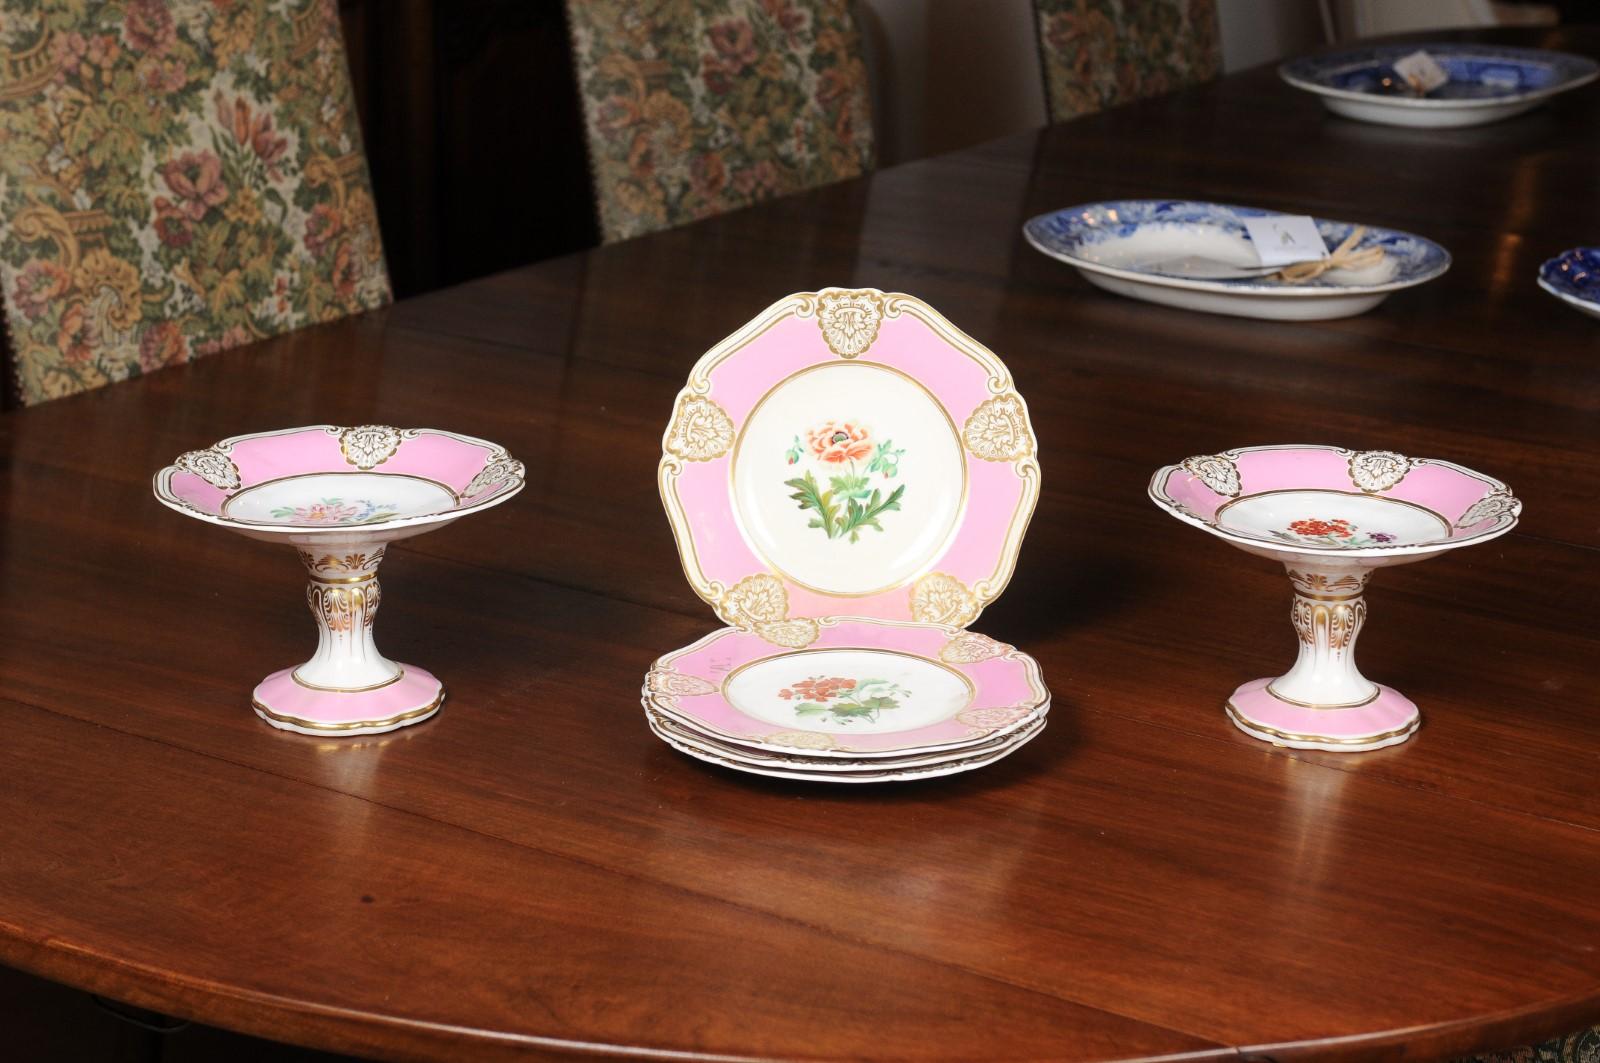 English George Grainger and Worcester Co. pink and white compotes from the late 19th century, with gilt accents and floral décor. They are priced and sold individually. Born in England during the last quarter of the 19th century, each of these items